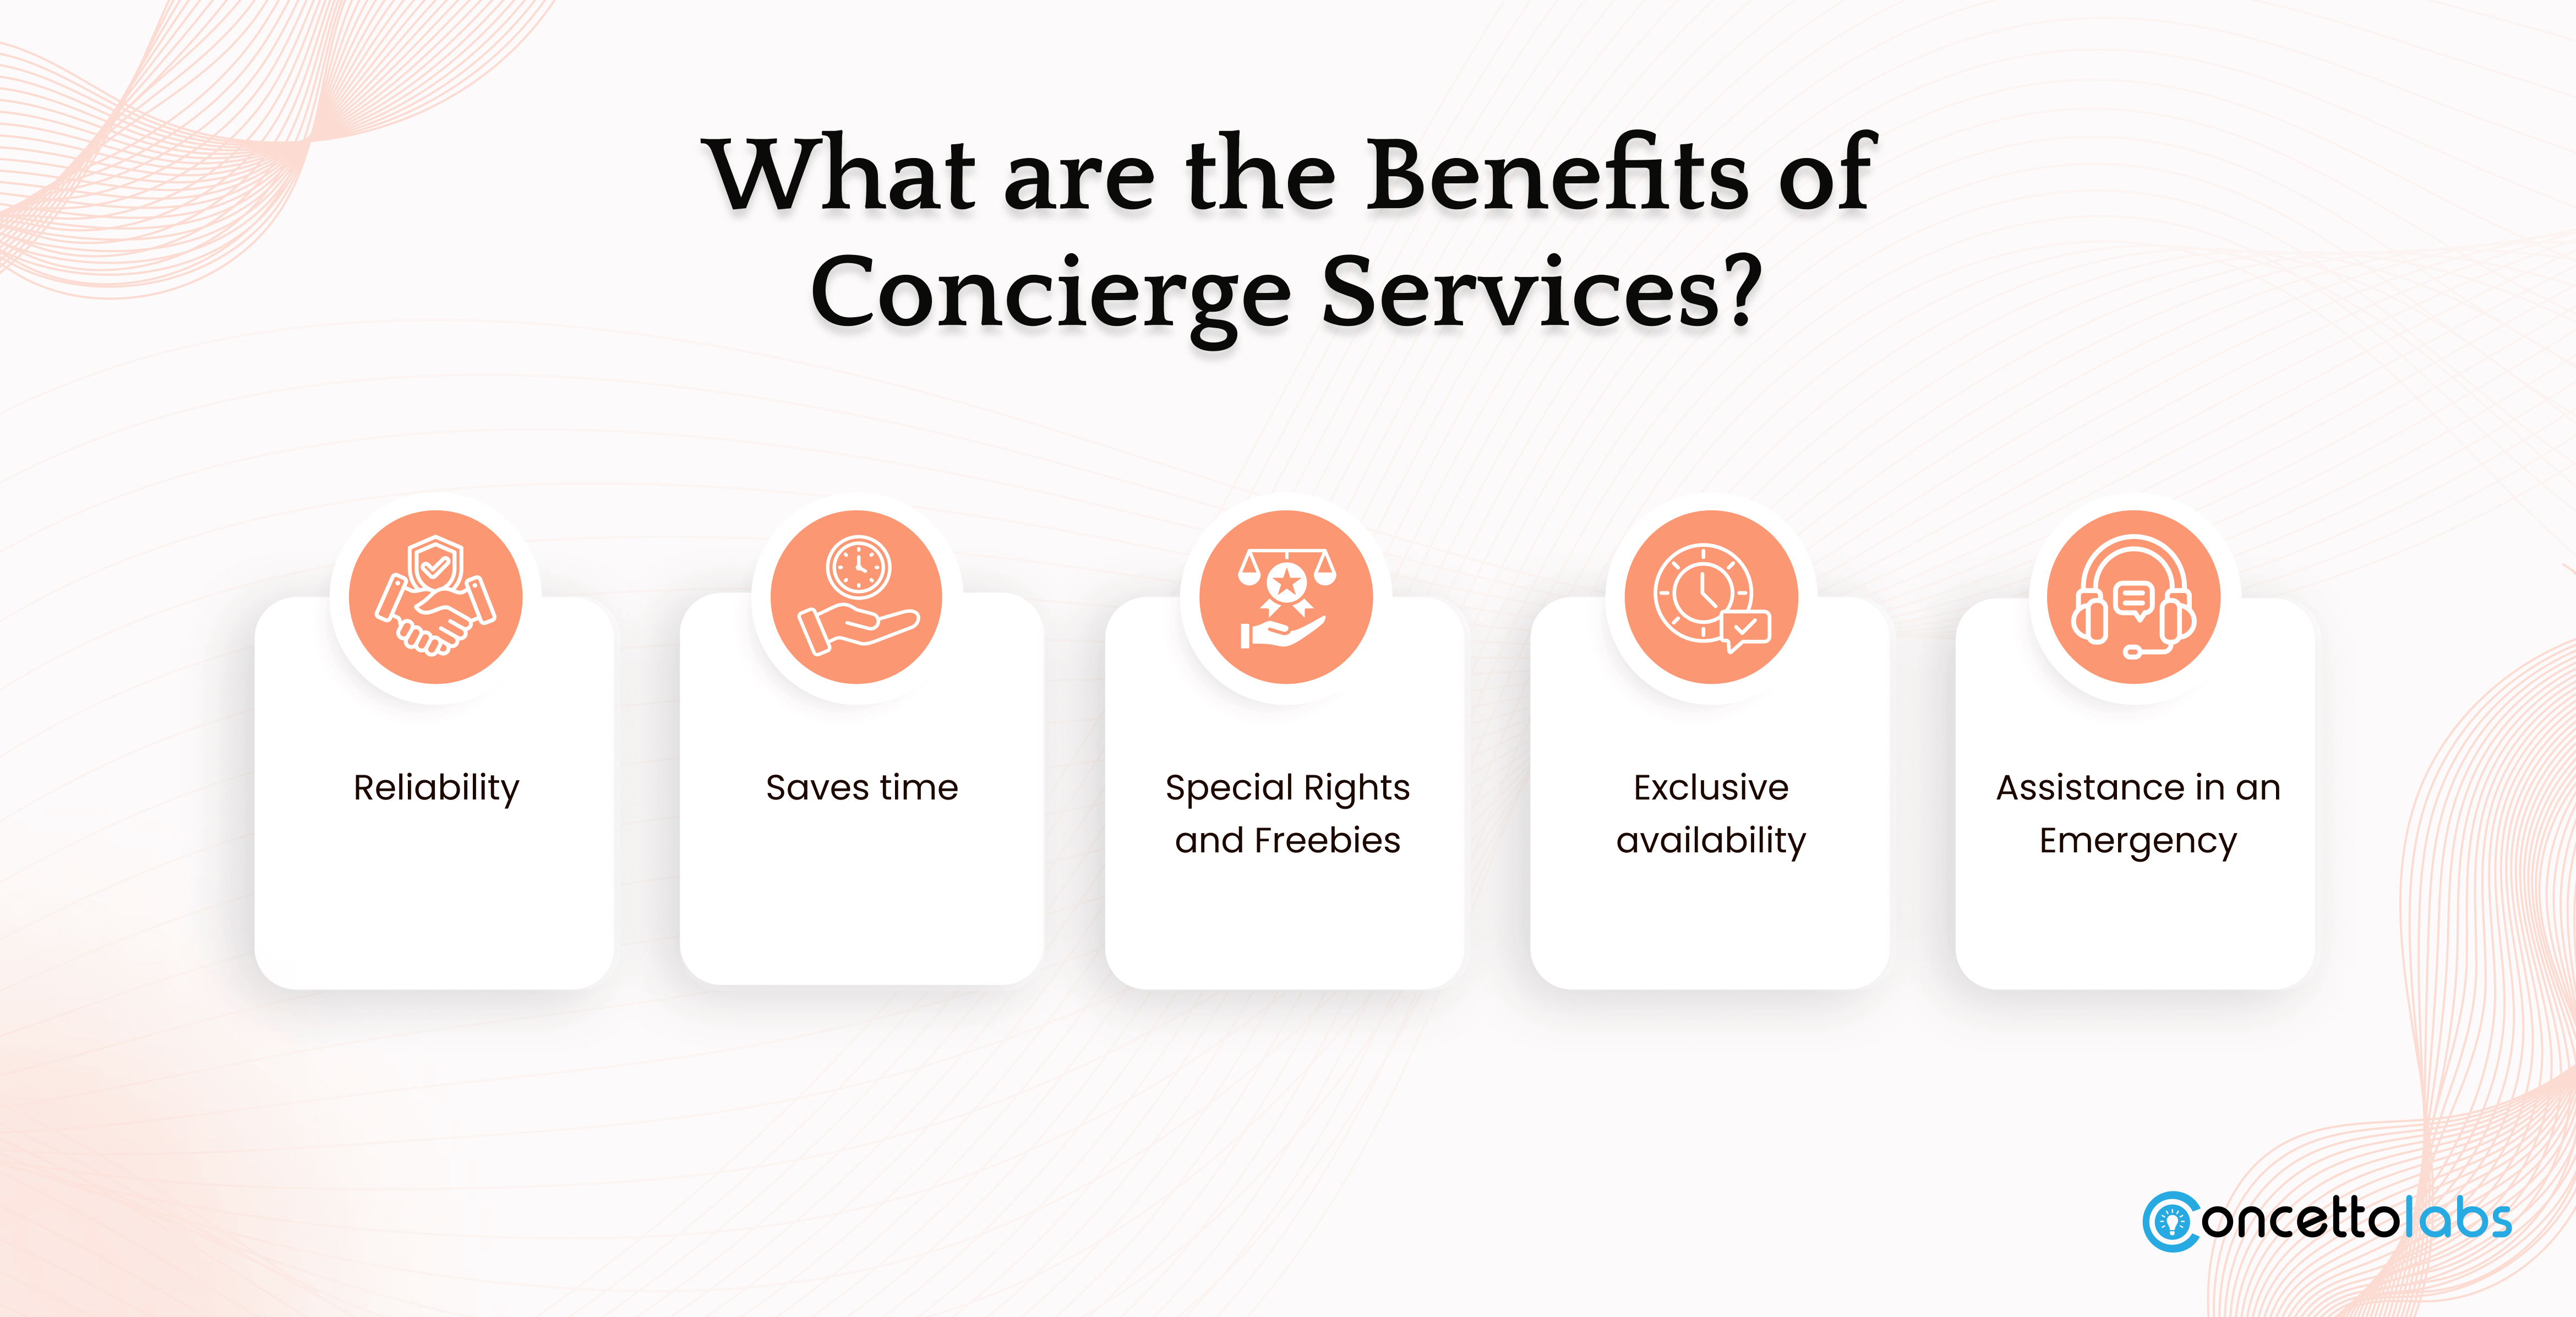 What are the Benefits of Concierge Services?